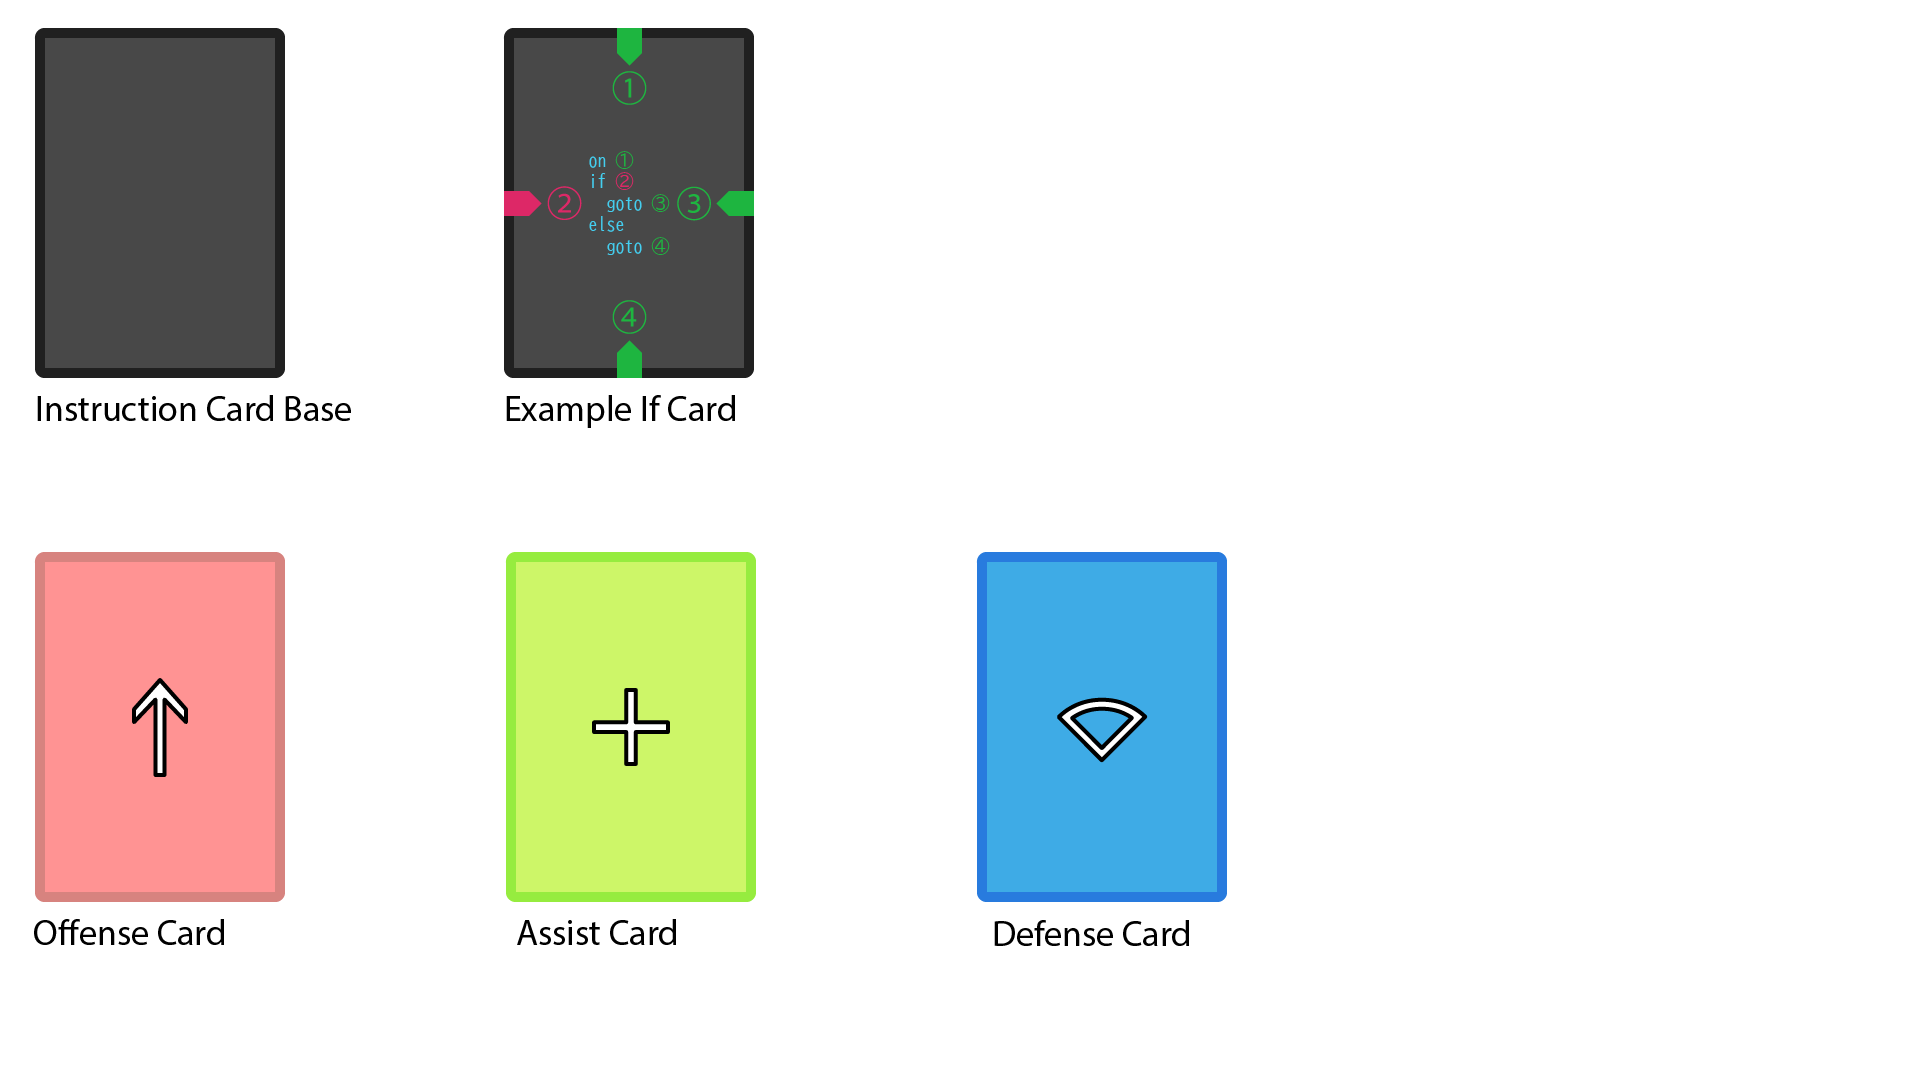 Neon style visuals for Flowgram. The blank card is greyscale, with a very dark border and a slightly dark background. To the right is a card representing the if-then-else control flow, with the top, right, and bottom lines being green control flow lines, and the left line being a magenta boolean line. In the center of the card is text describing how the card should be interpreted. Additionally, offense, assist, and defense cards are displayed, with the offense card having a red background and a white upwards arrow, the assist card having a green background with a white plus, and the defense card having a blue background with a white wedge.